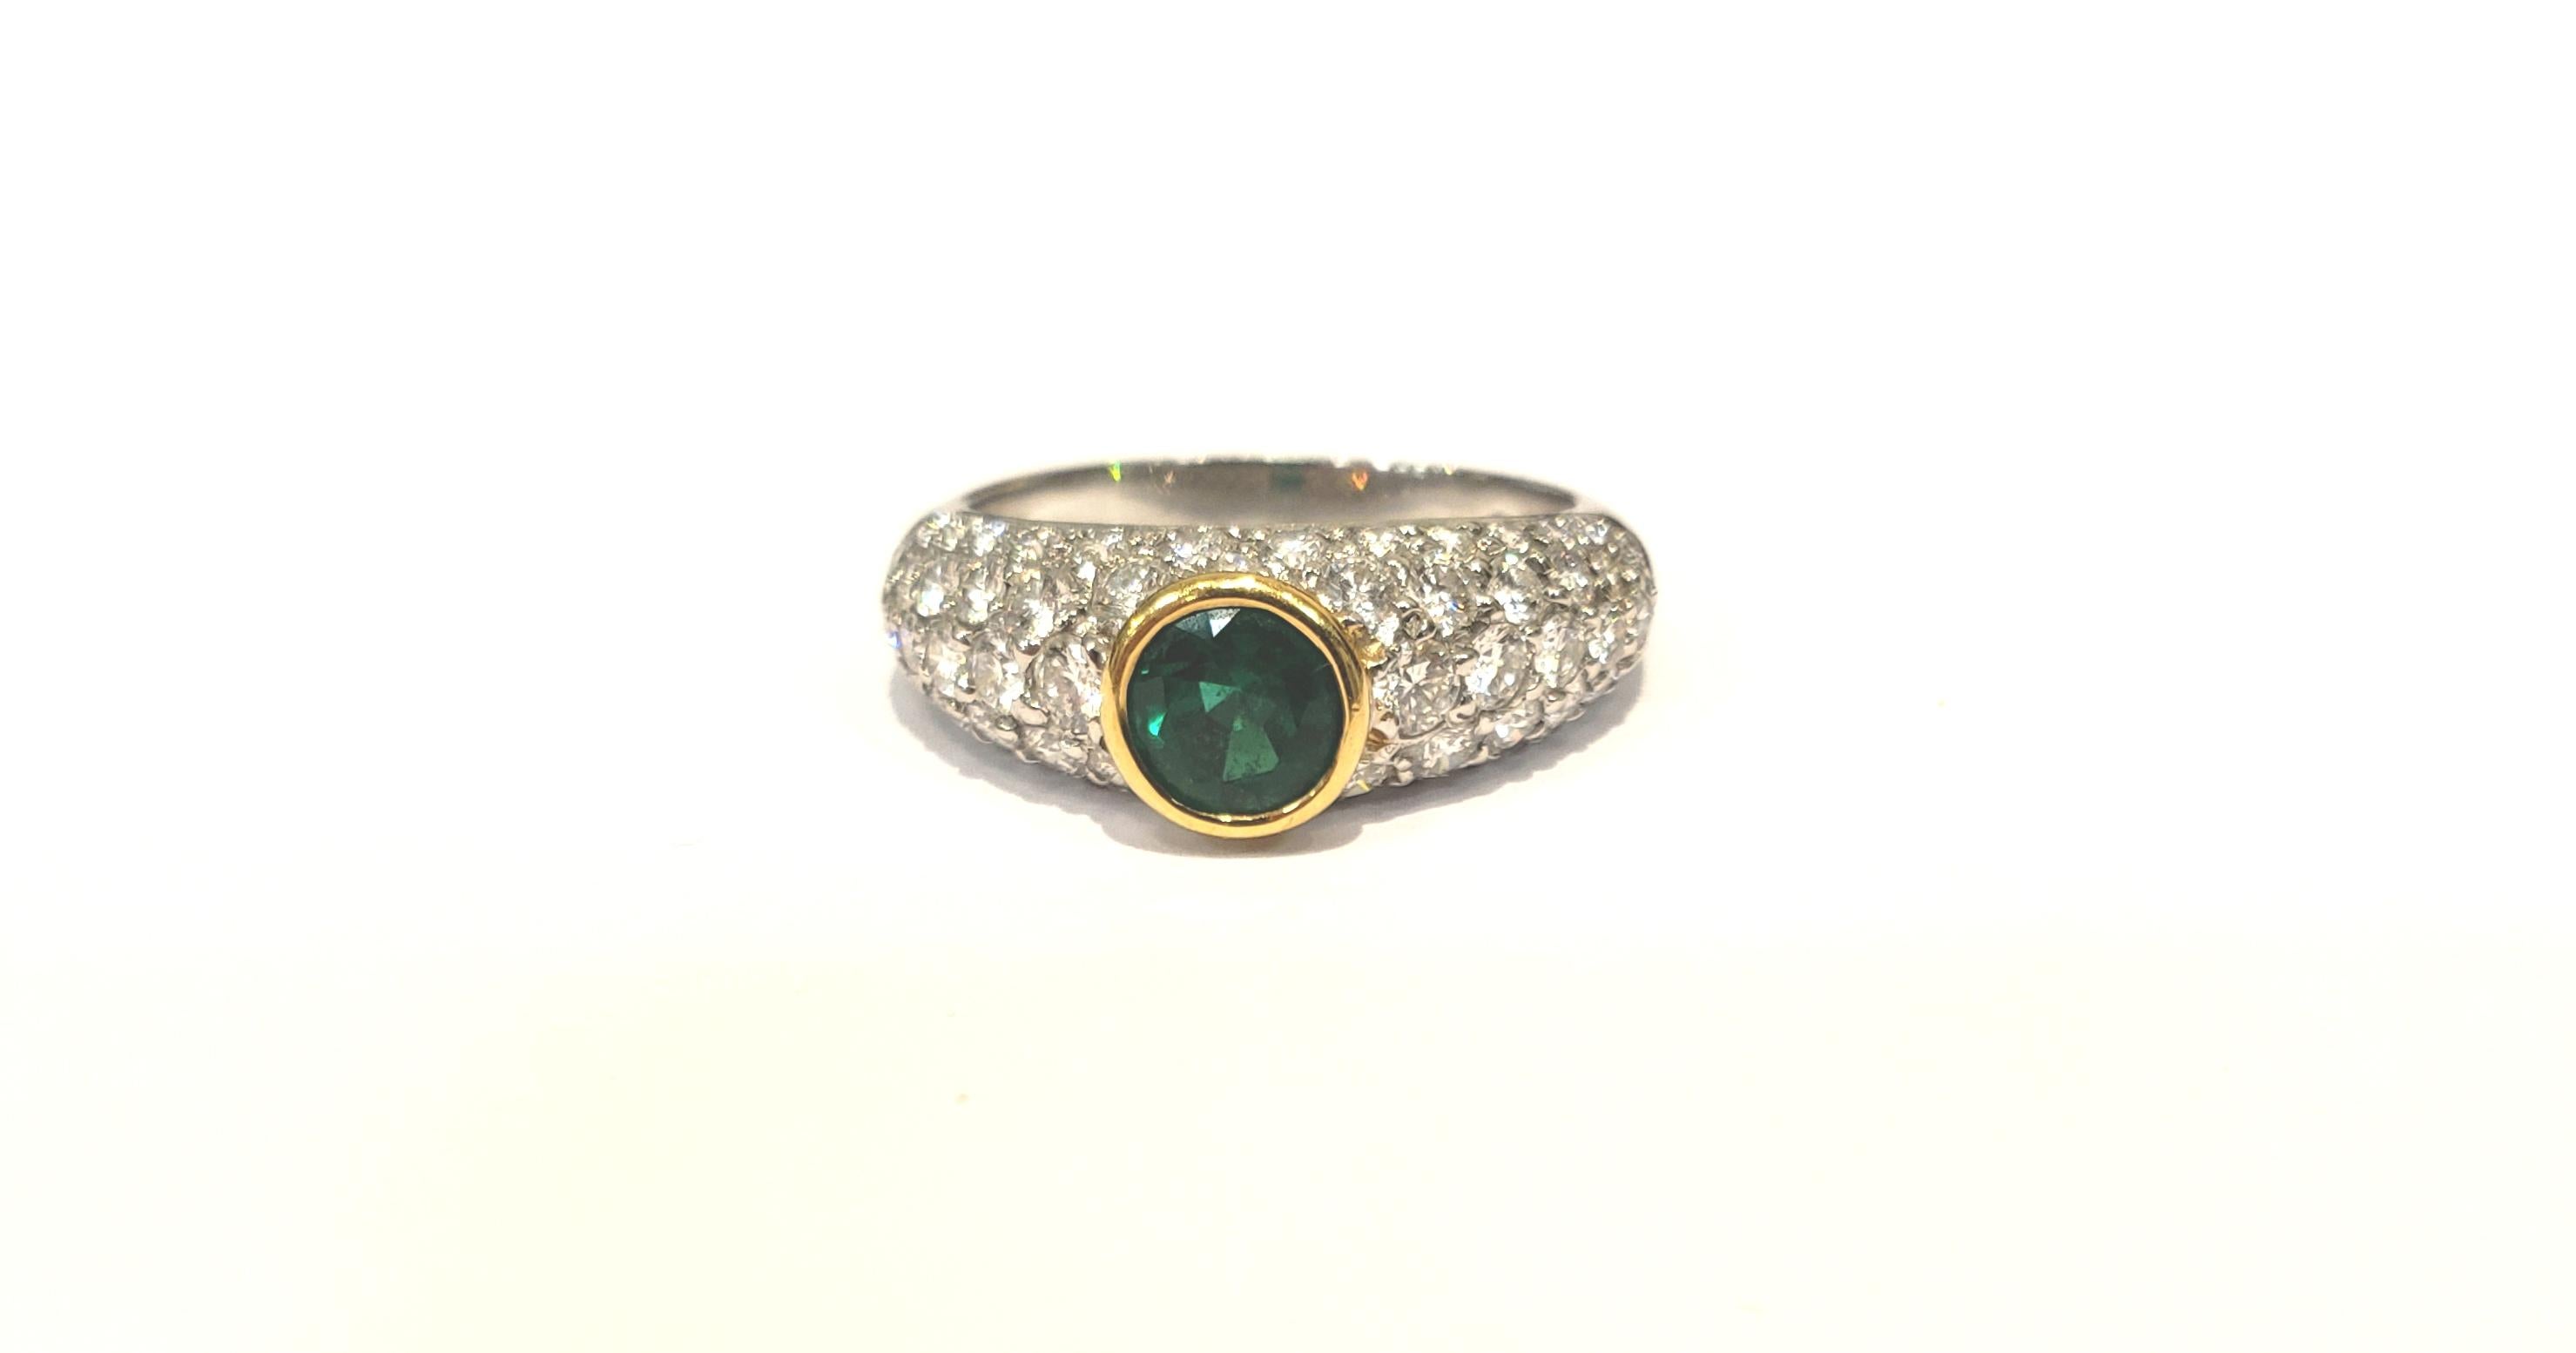 This Gorgeous Handmade Ring Is Done In Platinum, With A Faceted Round Emerald Bezel Set In 18 Karat Yellow Gold.
62 Round Brilliant Full Cut Diamonds Are Pave Set In Ring. Emerald Is 0.63 Carat. 62 Diamonds = 1.47 Carats
This Ring Is Beautiful On